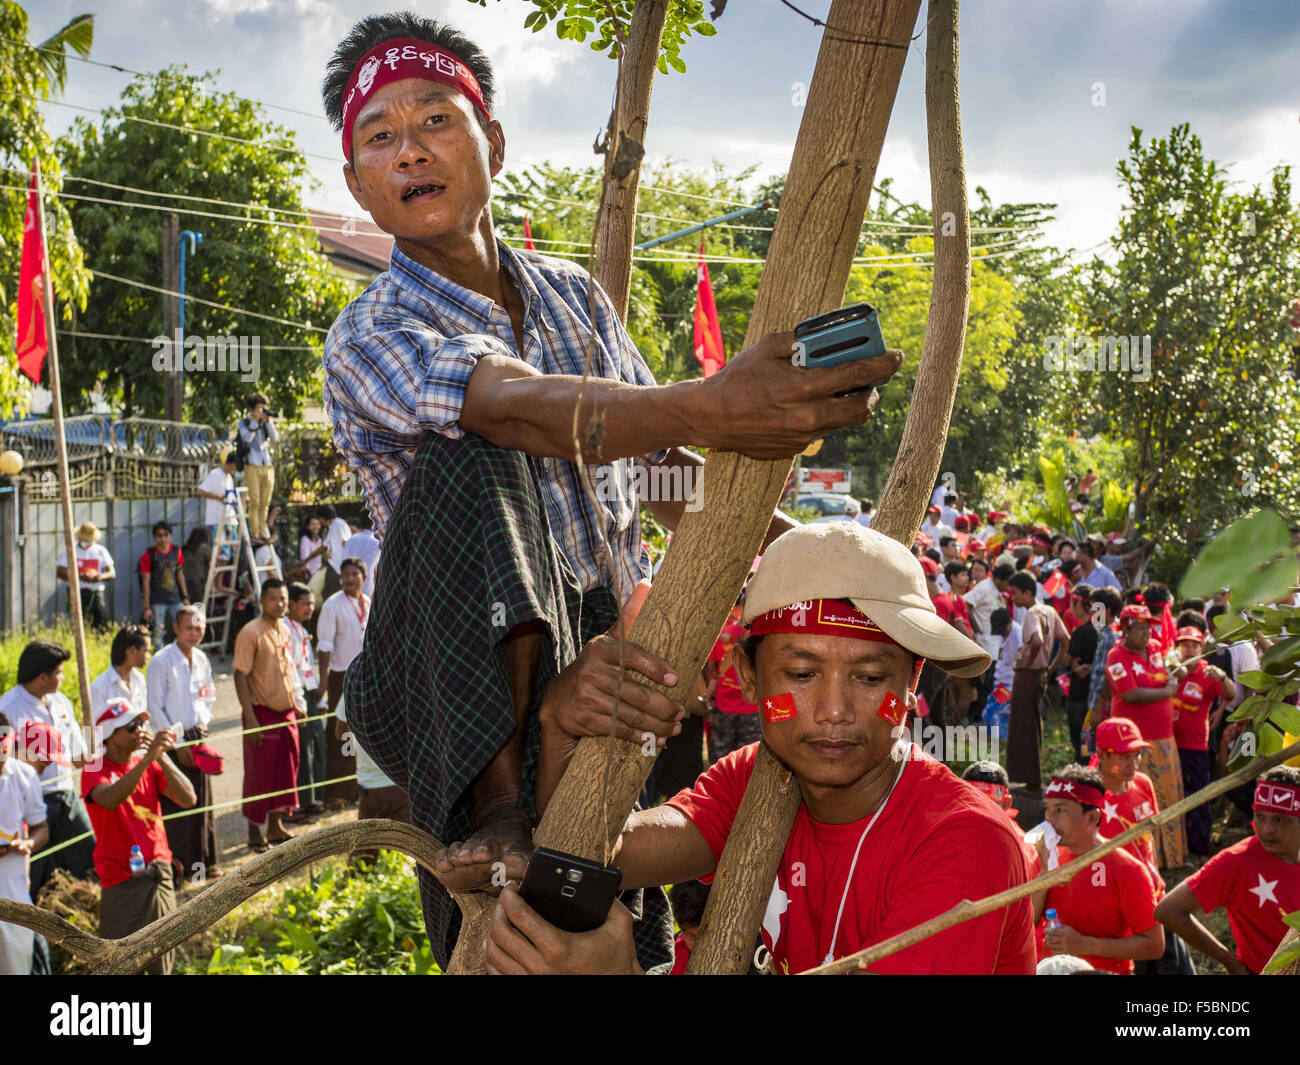 Yangon, Yangon Division, Myanmar. 1st Nov, 2015. Men climb a tree to get a better view of Aung San Suu Kyi at the NLD's last election rally of the 2015 election in the Yangon suburbs Sunday. Political parties are wrapping up their campaigns in Myanmar (Burma). National elections are scheduled for Sunday Nov. 8. The two principal parties are the National League for Democracy (NLD), the party of democracy icon and Nobel Peace Prize winner Aung San Suu Kyi, and the ruling Union Solidarity and Development Party (USDP), led by incumbent President Thein Sein. There are more than 30 parties campaign Stock Photo